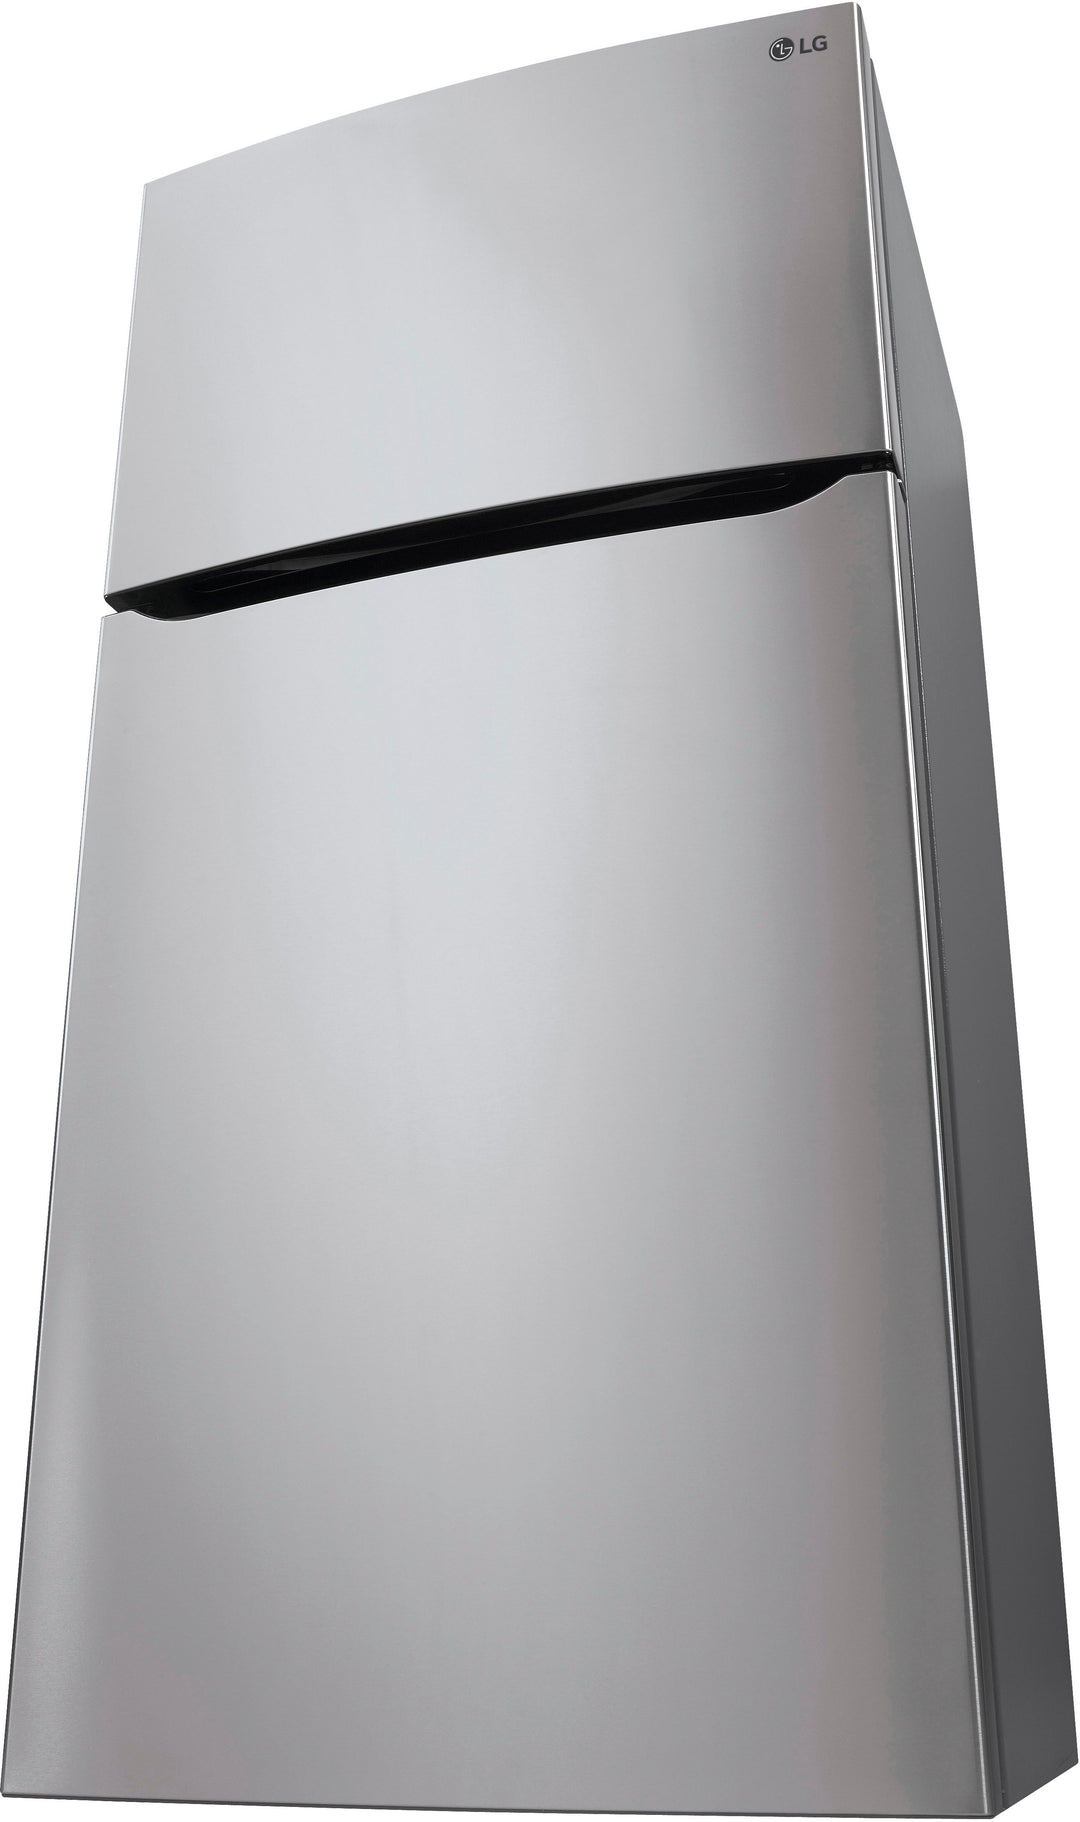 LG - 23.8 Cu Ft Top Mount Refrigerator with Internal Water Dispenser - Stainless steel_3